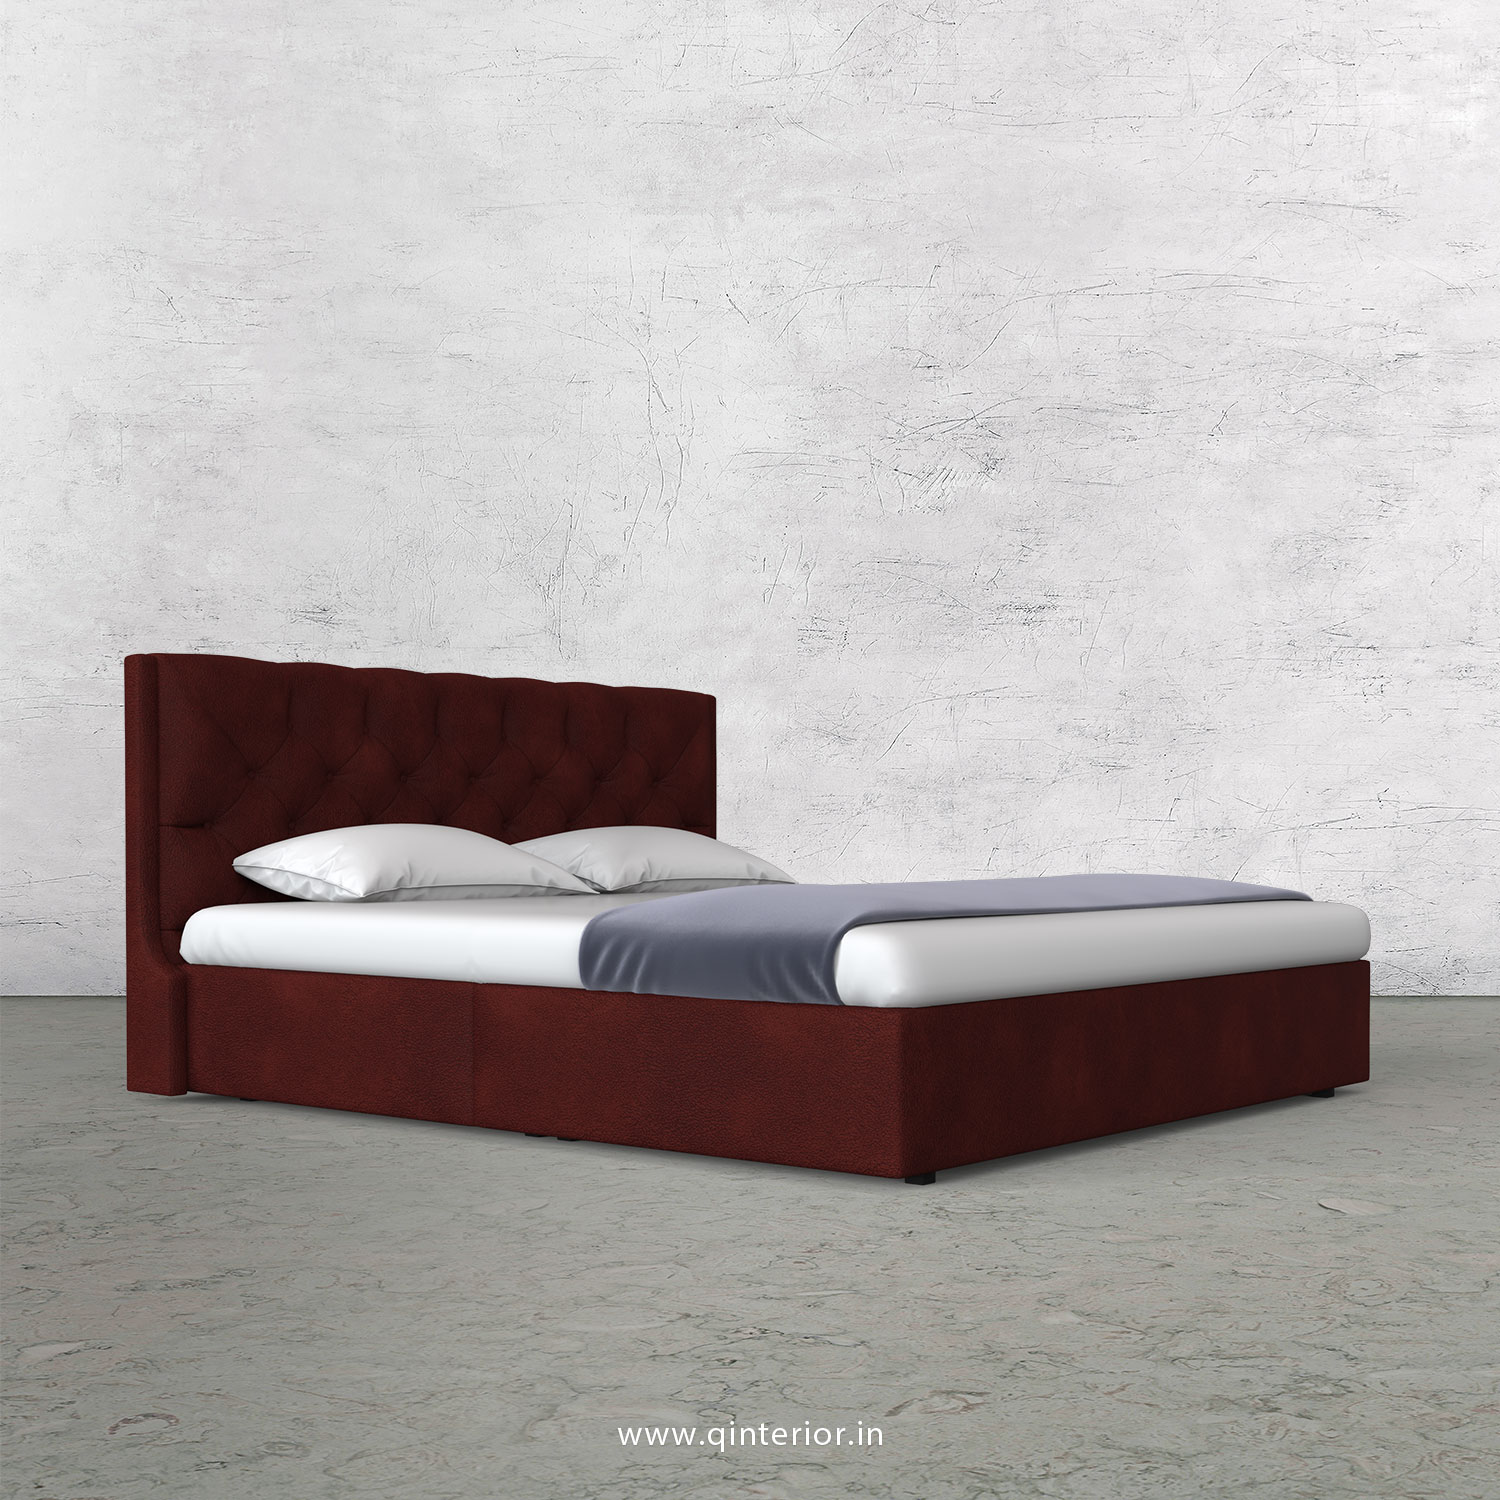 Scorpius Queen Bed in Fab Leather Fabric - QBD009 FL08